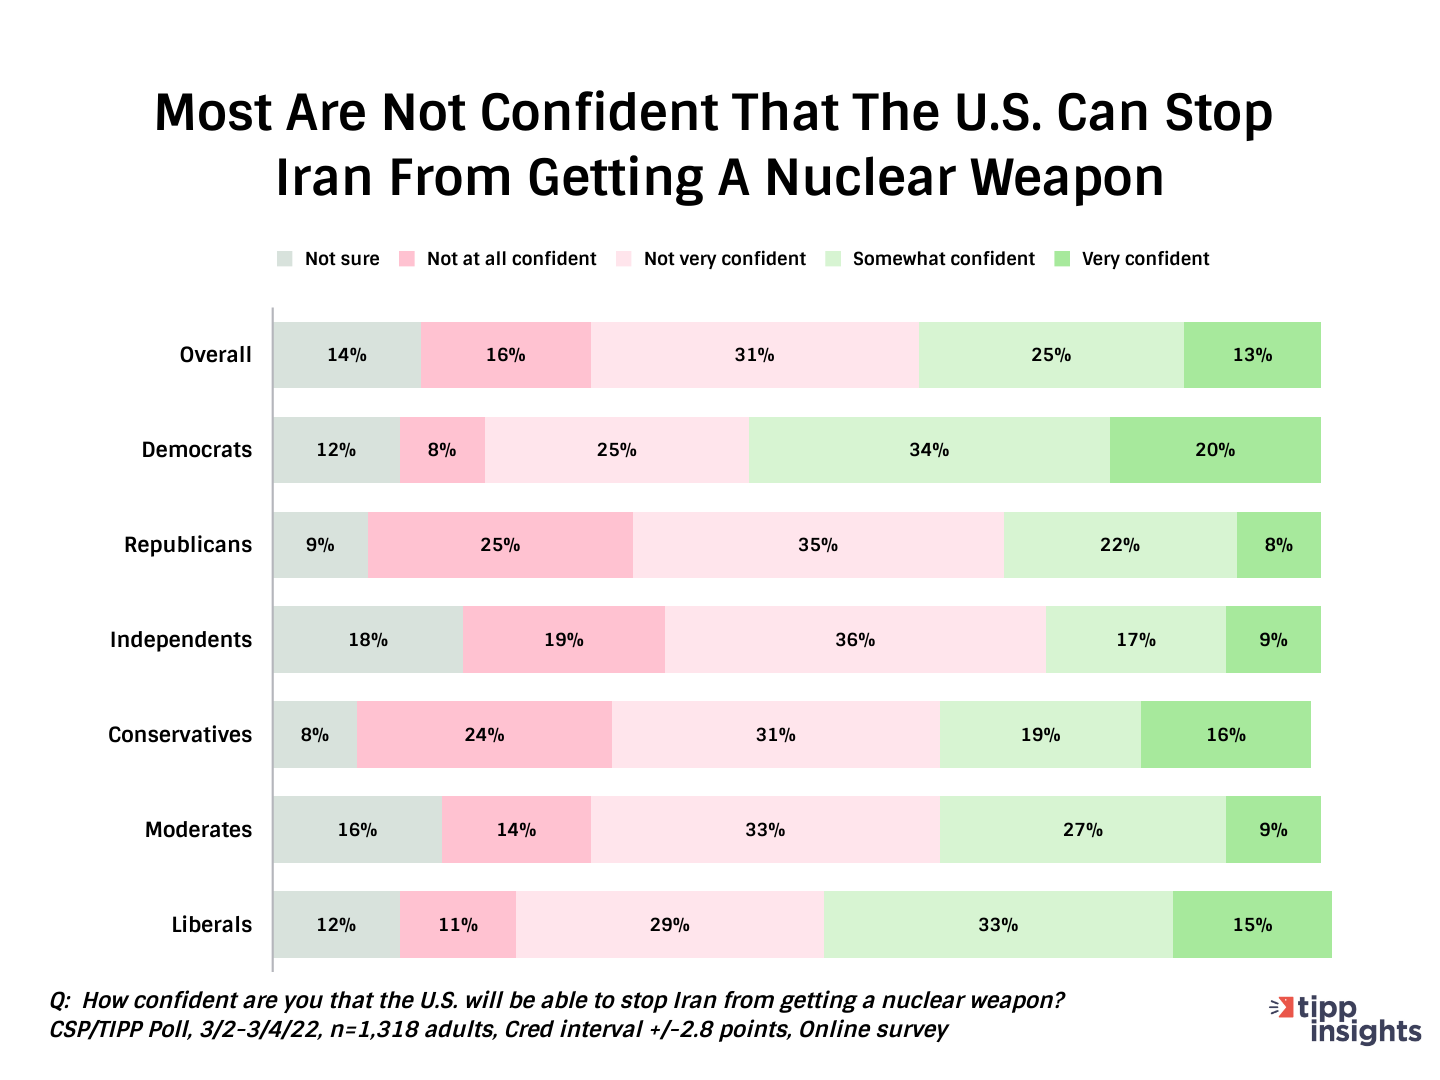 CSP/TIPP Poll Results: Most Americans are not confident that the U.S. can stop Iran from getting a nuclear weapon.